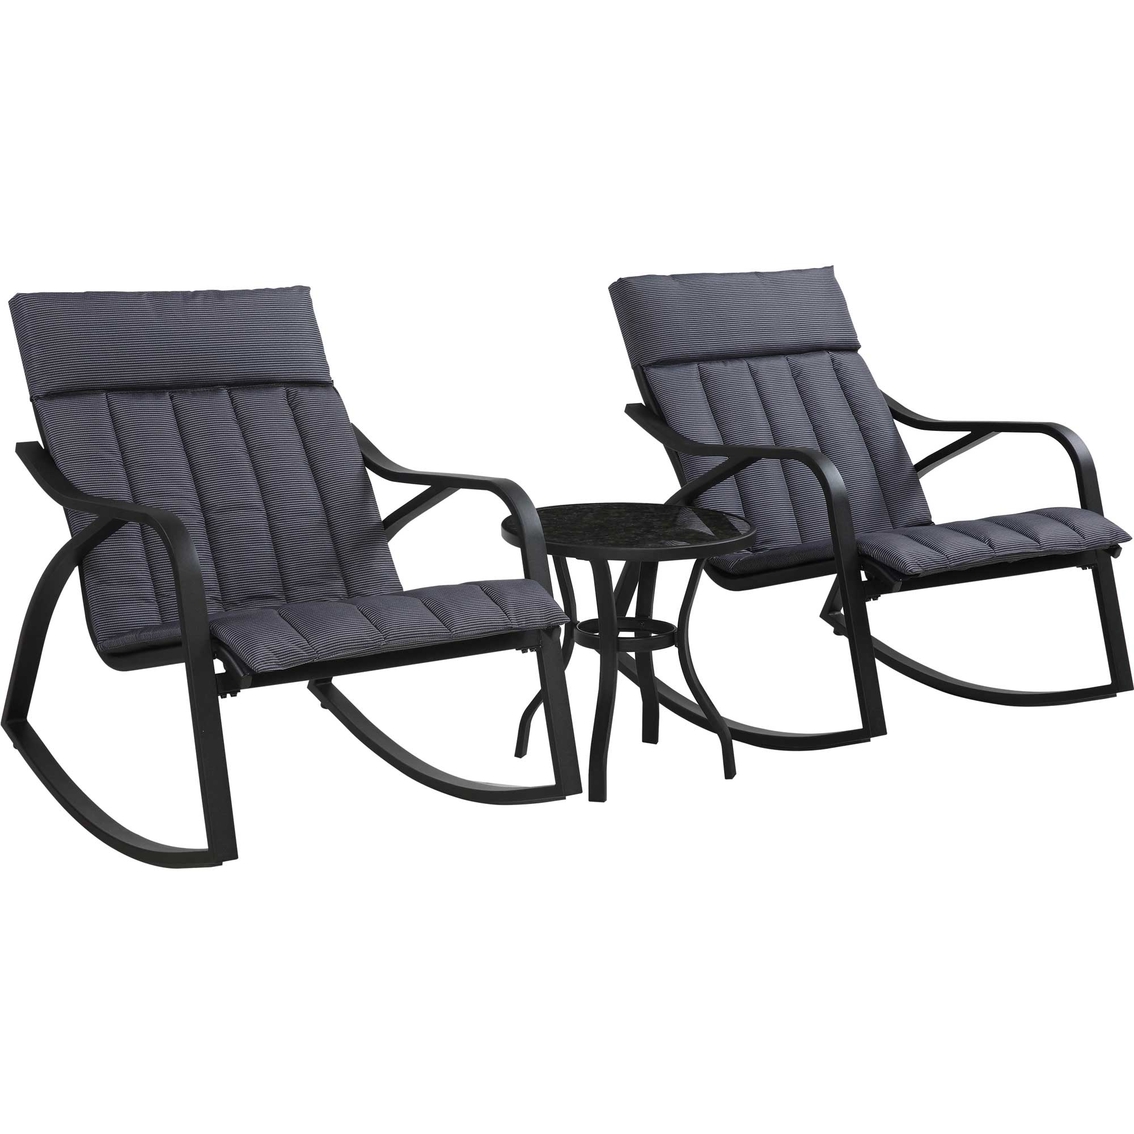 Home Creations Rio 3 pc. Cushioned Rocker Set - Image 2 of 4